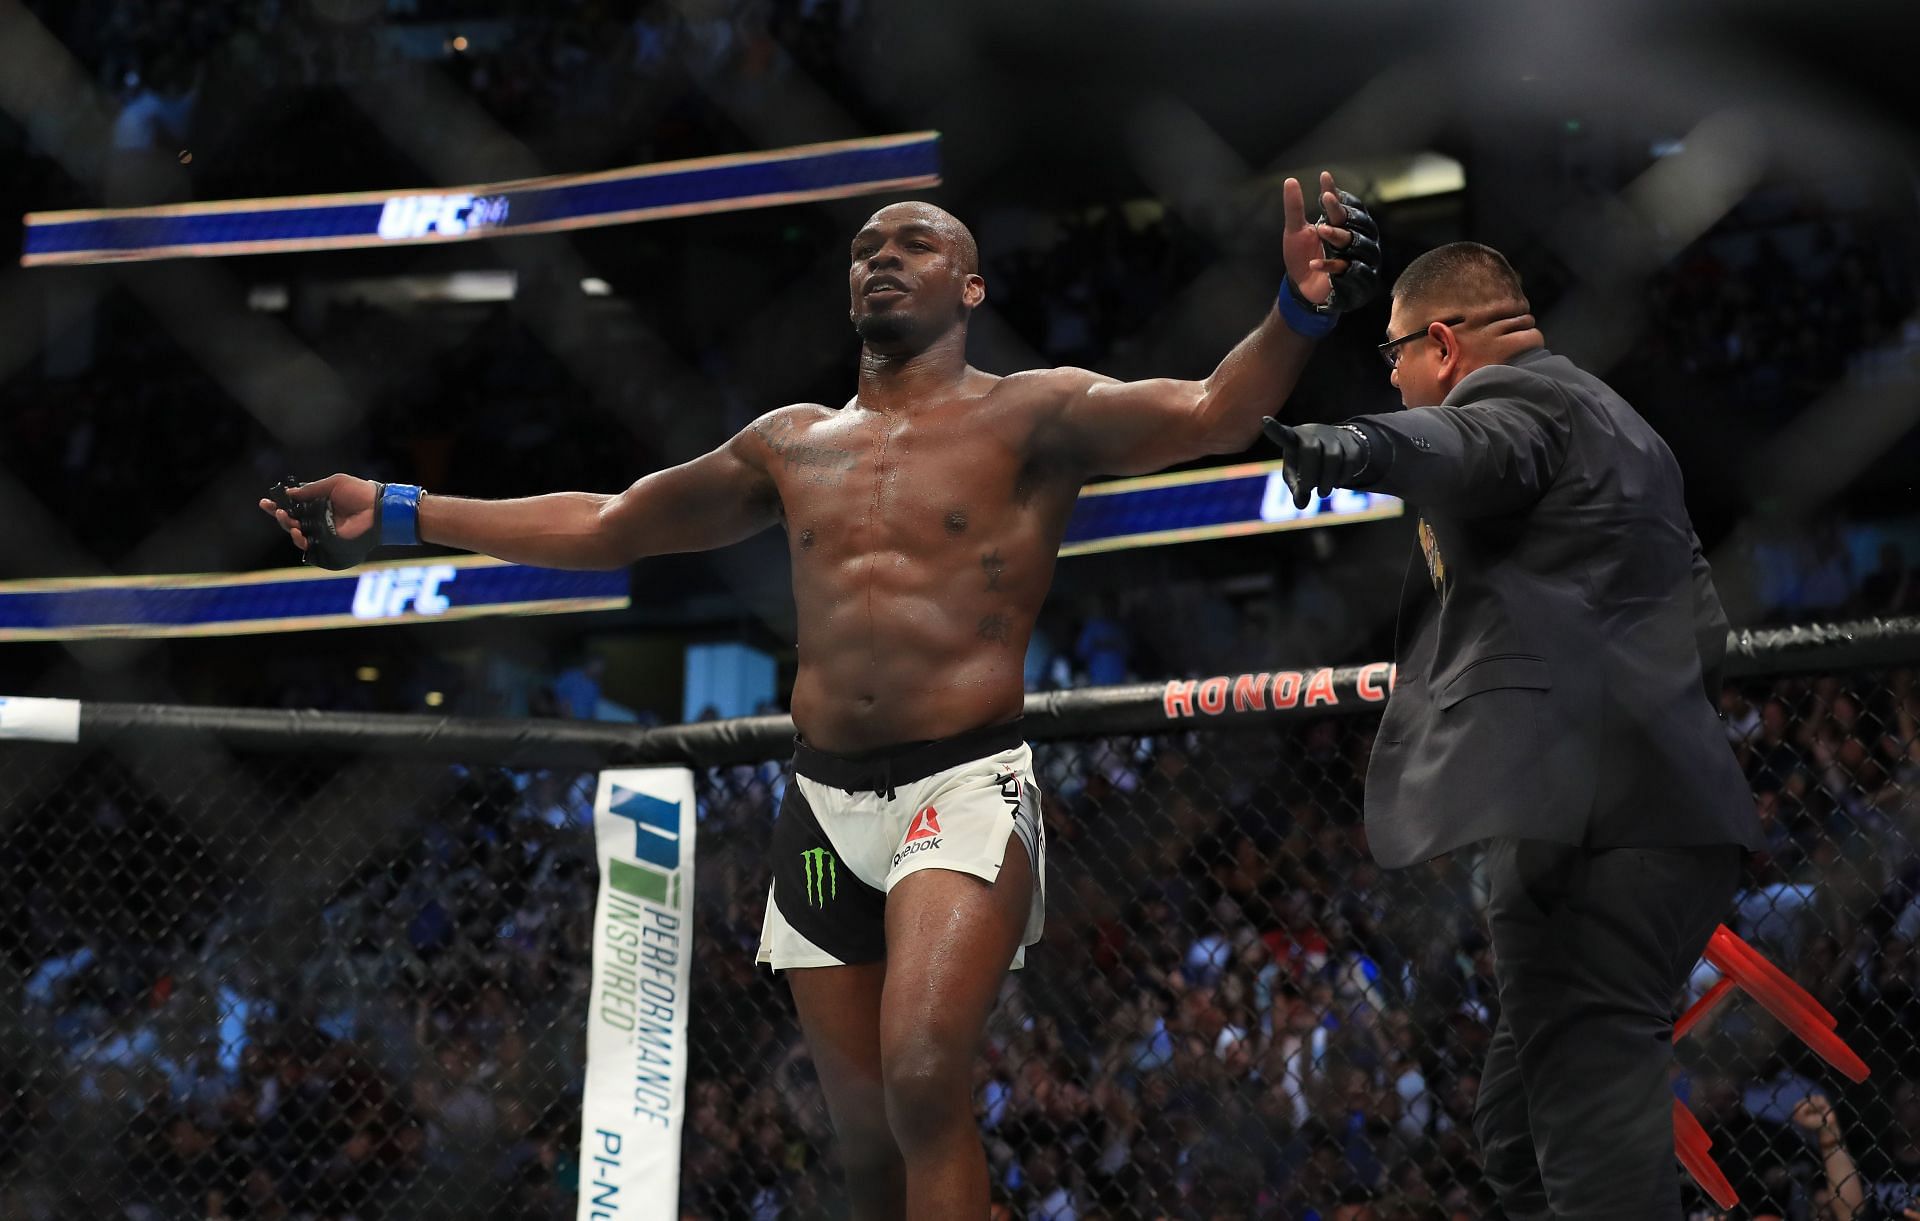 Jon Jones called out former heavyweight champ Brock Lesnar in 2017, but the fight never took place